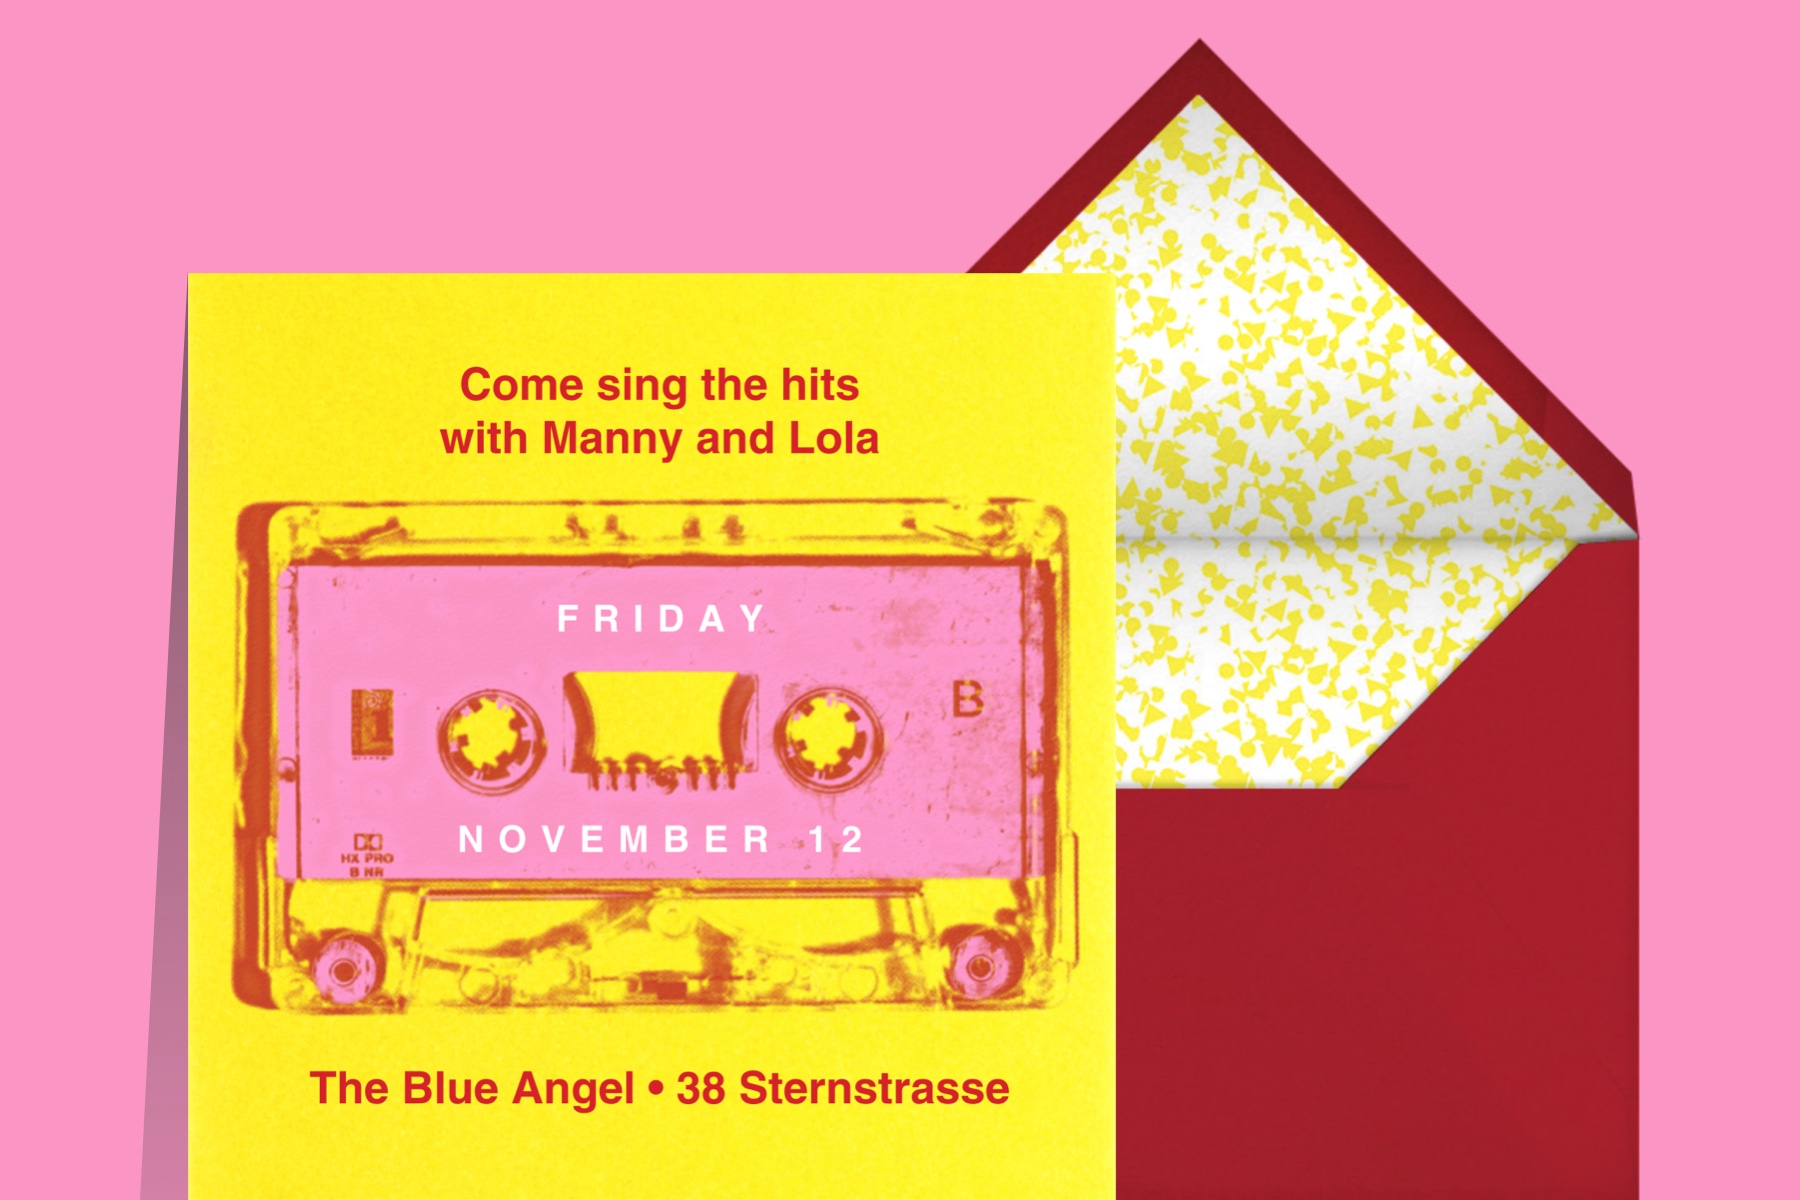 “Mix Tape” invitation by Paperless Post featuring a pink cassette tape on a yellow background.